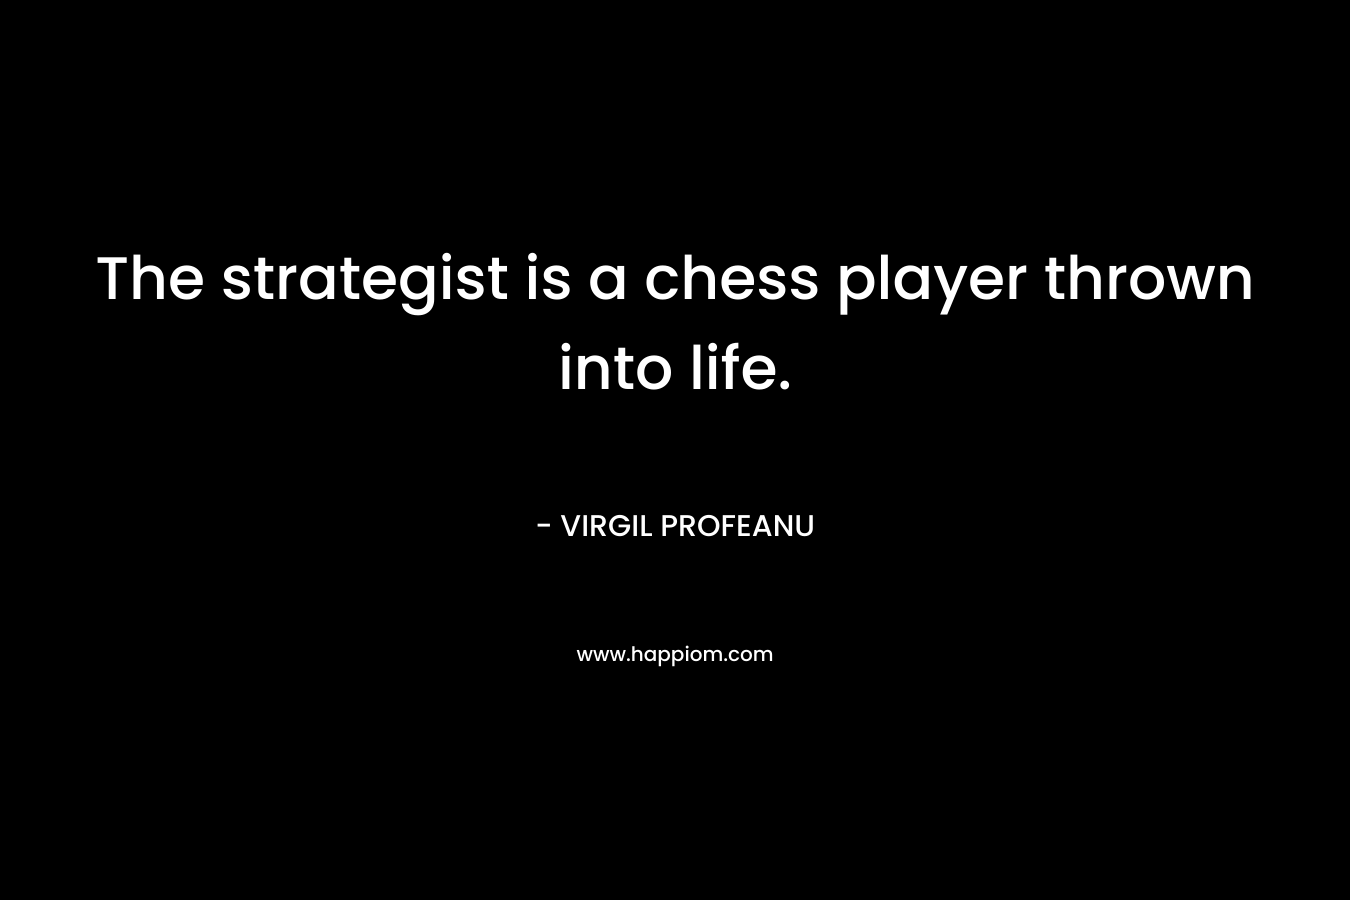 The strategist is a chess player thrown into life.